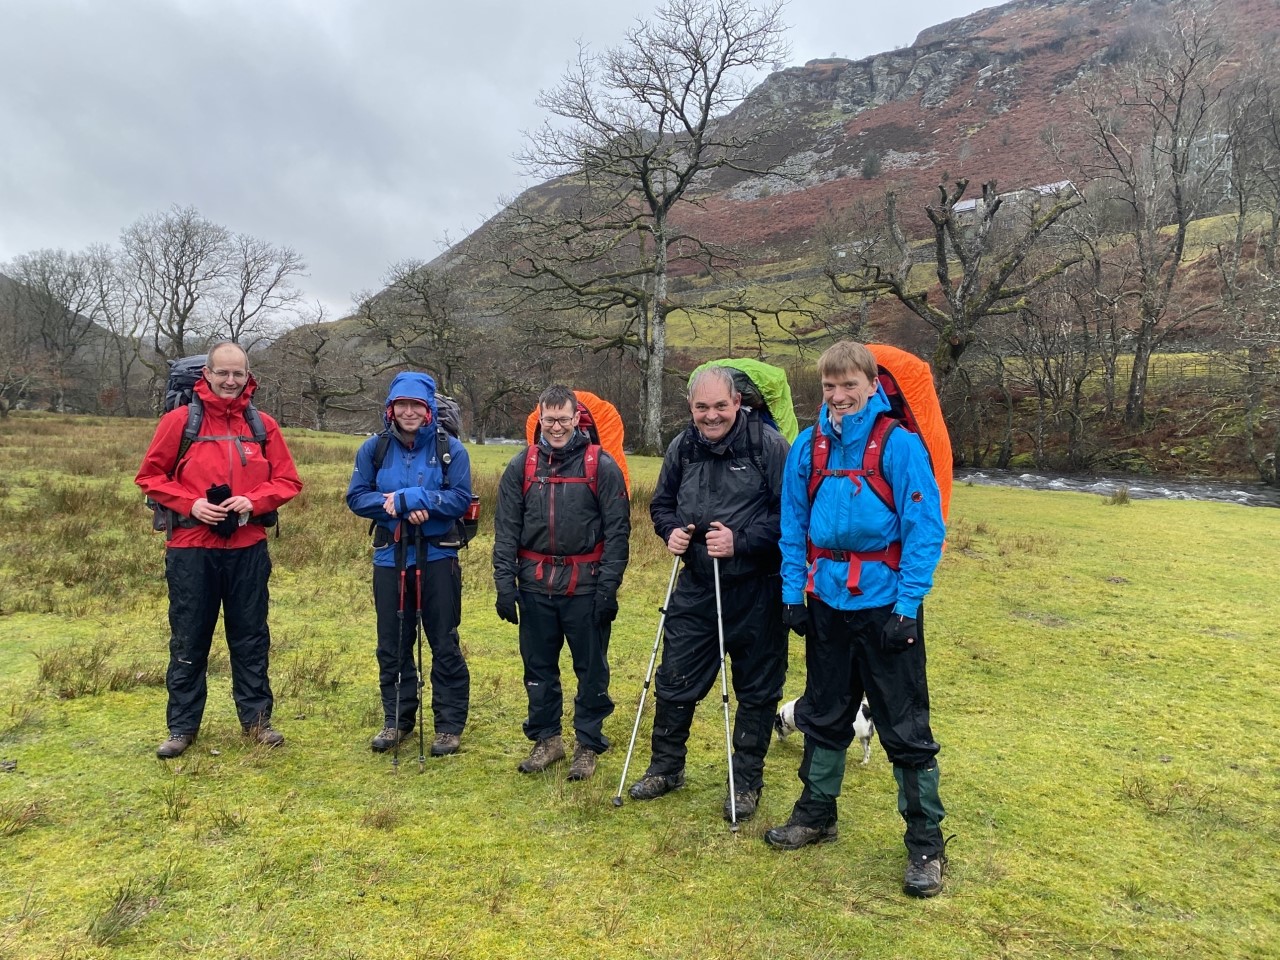 Five happy staff in brightly coloured wet weather gear and large backpacks are ready to trek the mountain behind them in the Elan Valley